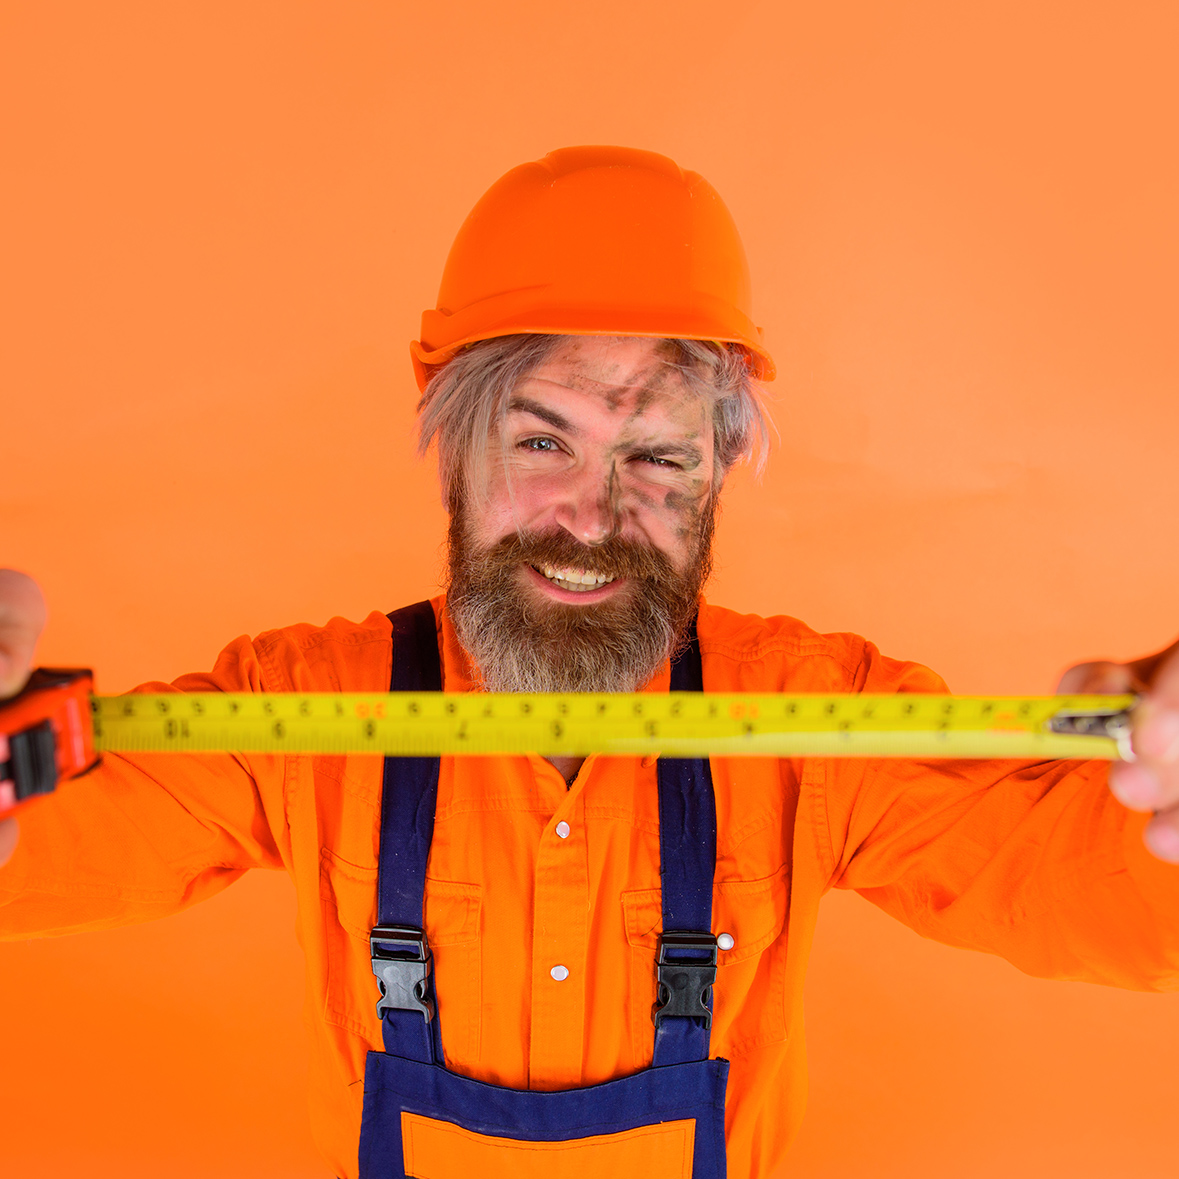 Builder with measure tape. Selective focus. Measuring device. Construction worker. Worker use tape measure. Builder equipment. Bearded builder in protective helmet. Repair tools